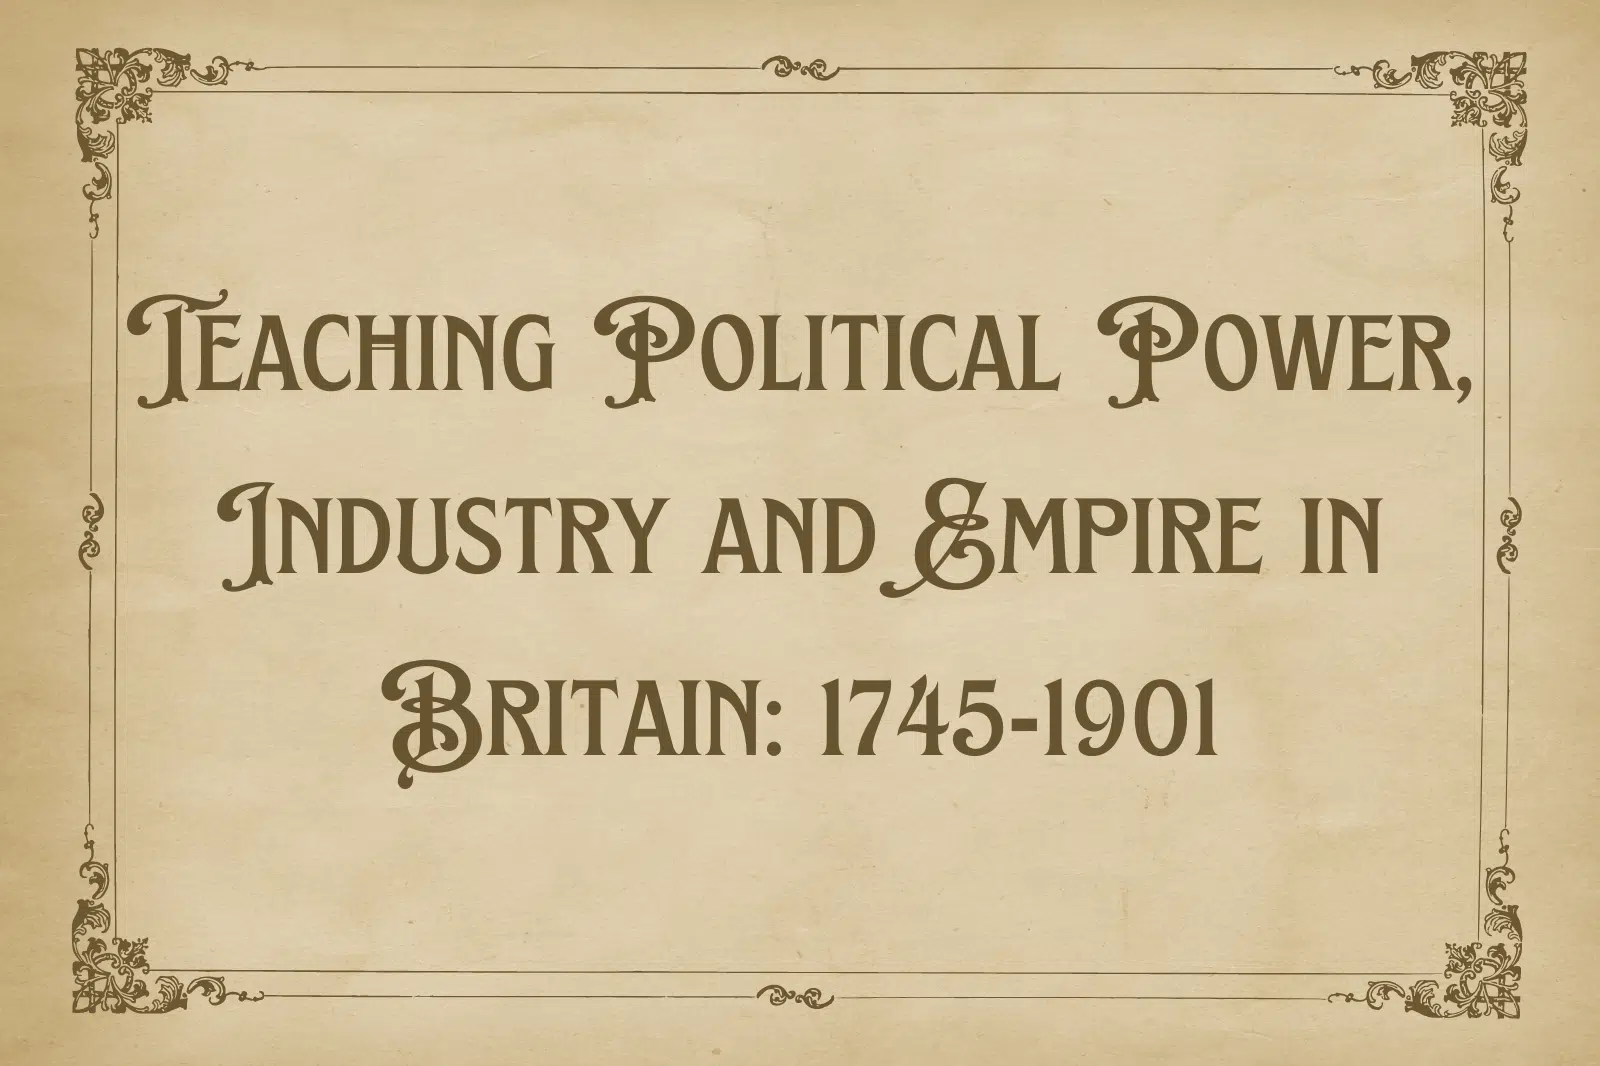 Teaching Political Power, Industry and Empire in Britain: 1745-1901